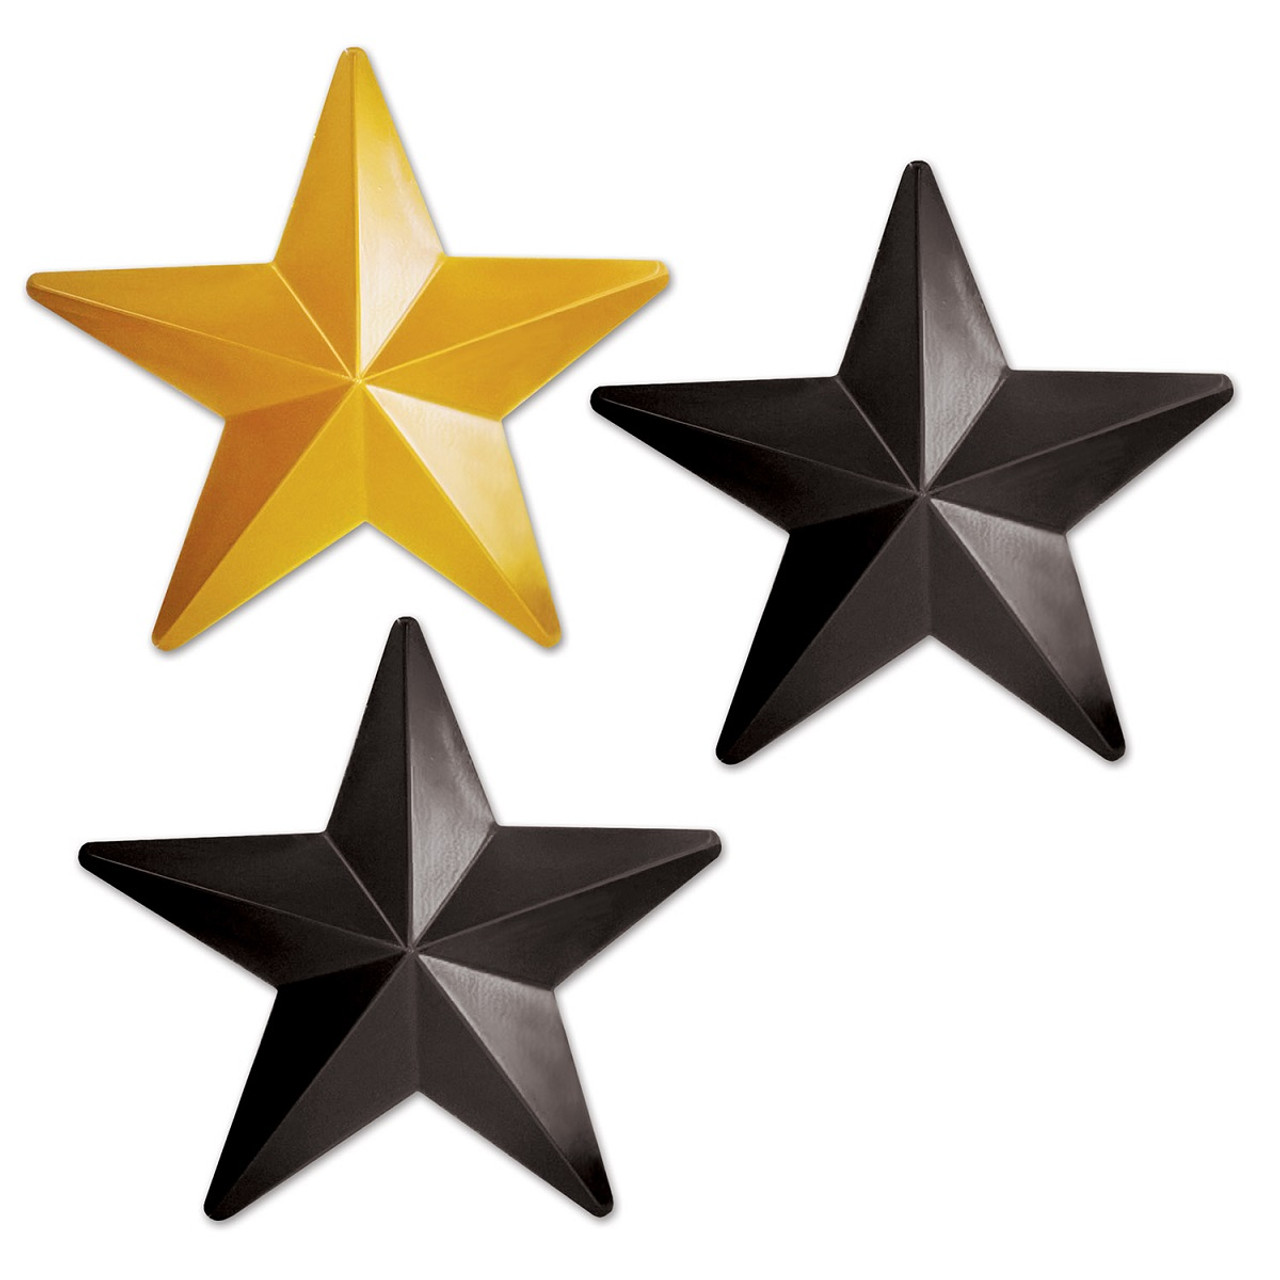  Beistle Metallic Star Cutouts (Gold) Pack of 3 : Home & Kitchen